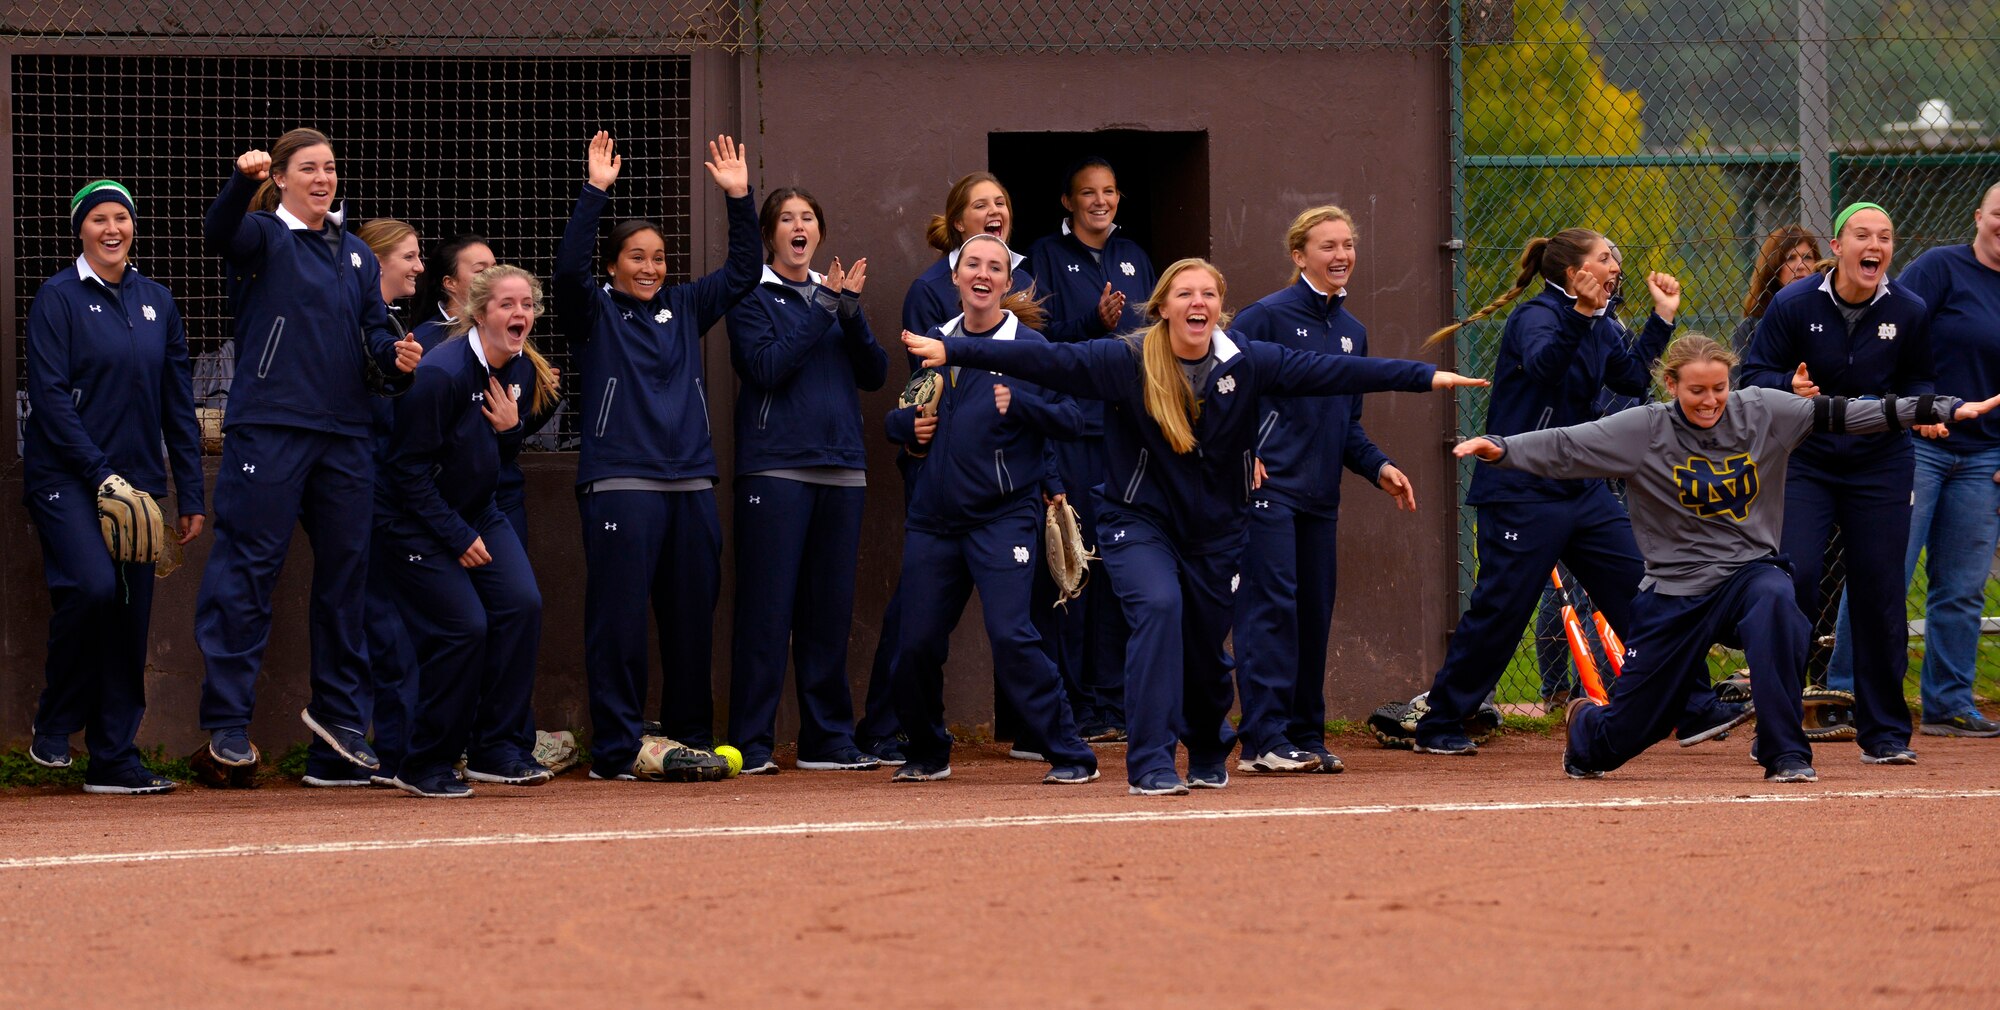 Members of the University of Notre Dame softball team celebrate during a scrimmage against the Ramstein Air Base Lady Rams Oct. 21, 2015, at Ramstein Air Base, Germany. The scrimmage was part of the Notre Dame softball team’s base visit during their 10-day European tour. Notre Dame team members also held softball instructional clinics for students at Ramstein and Kaiserslautern High Schools. (U.S. Air Force photo/Staff Sgt. Sharida Jackson